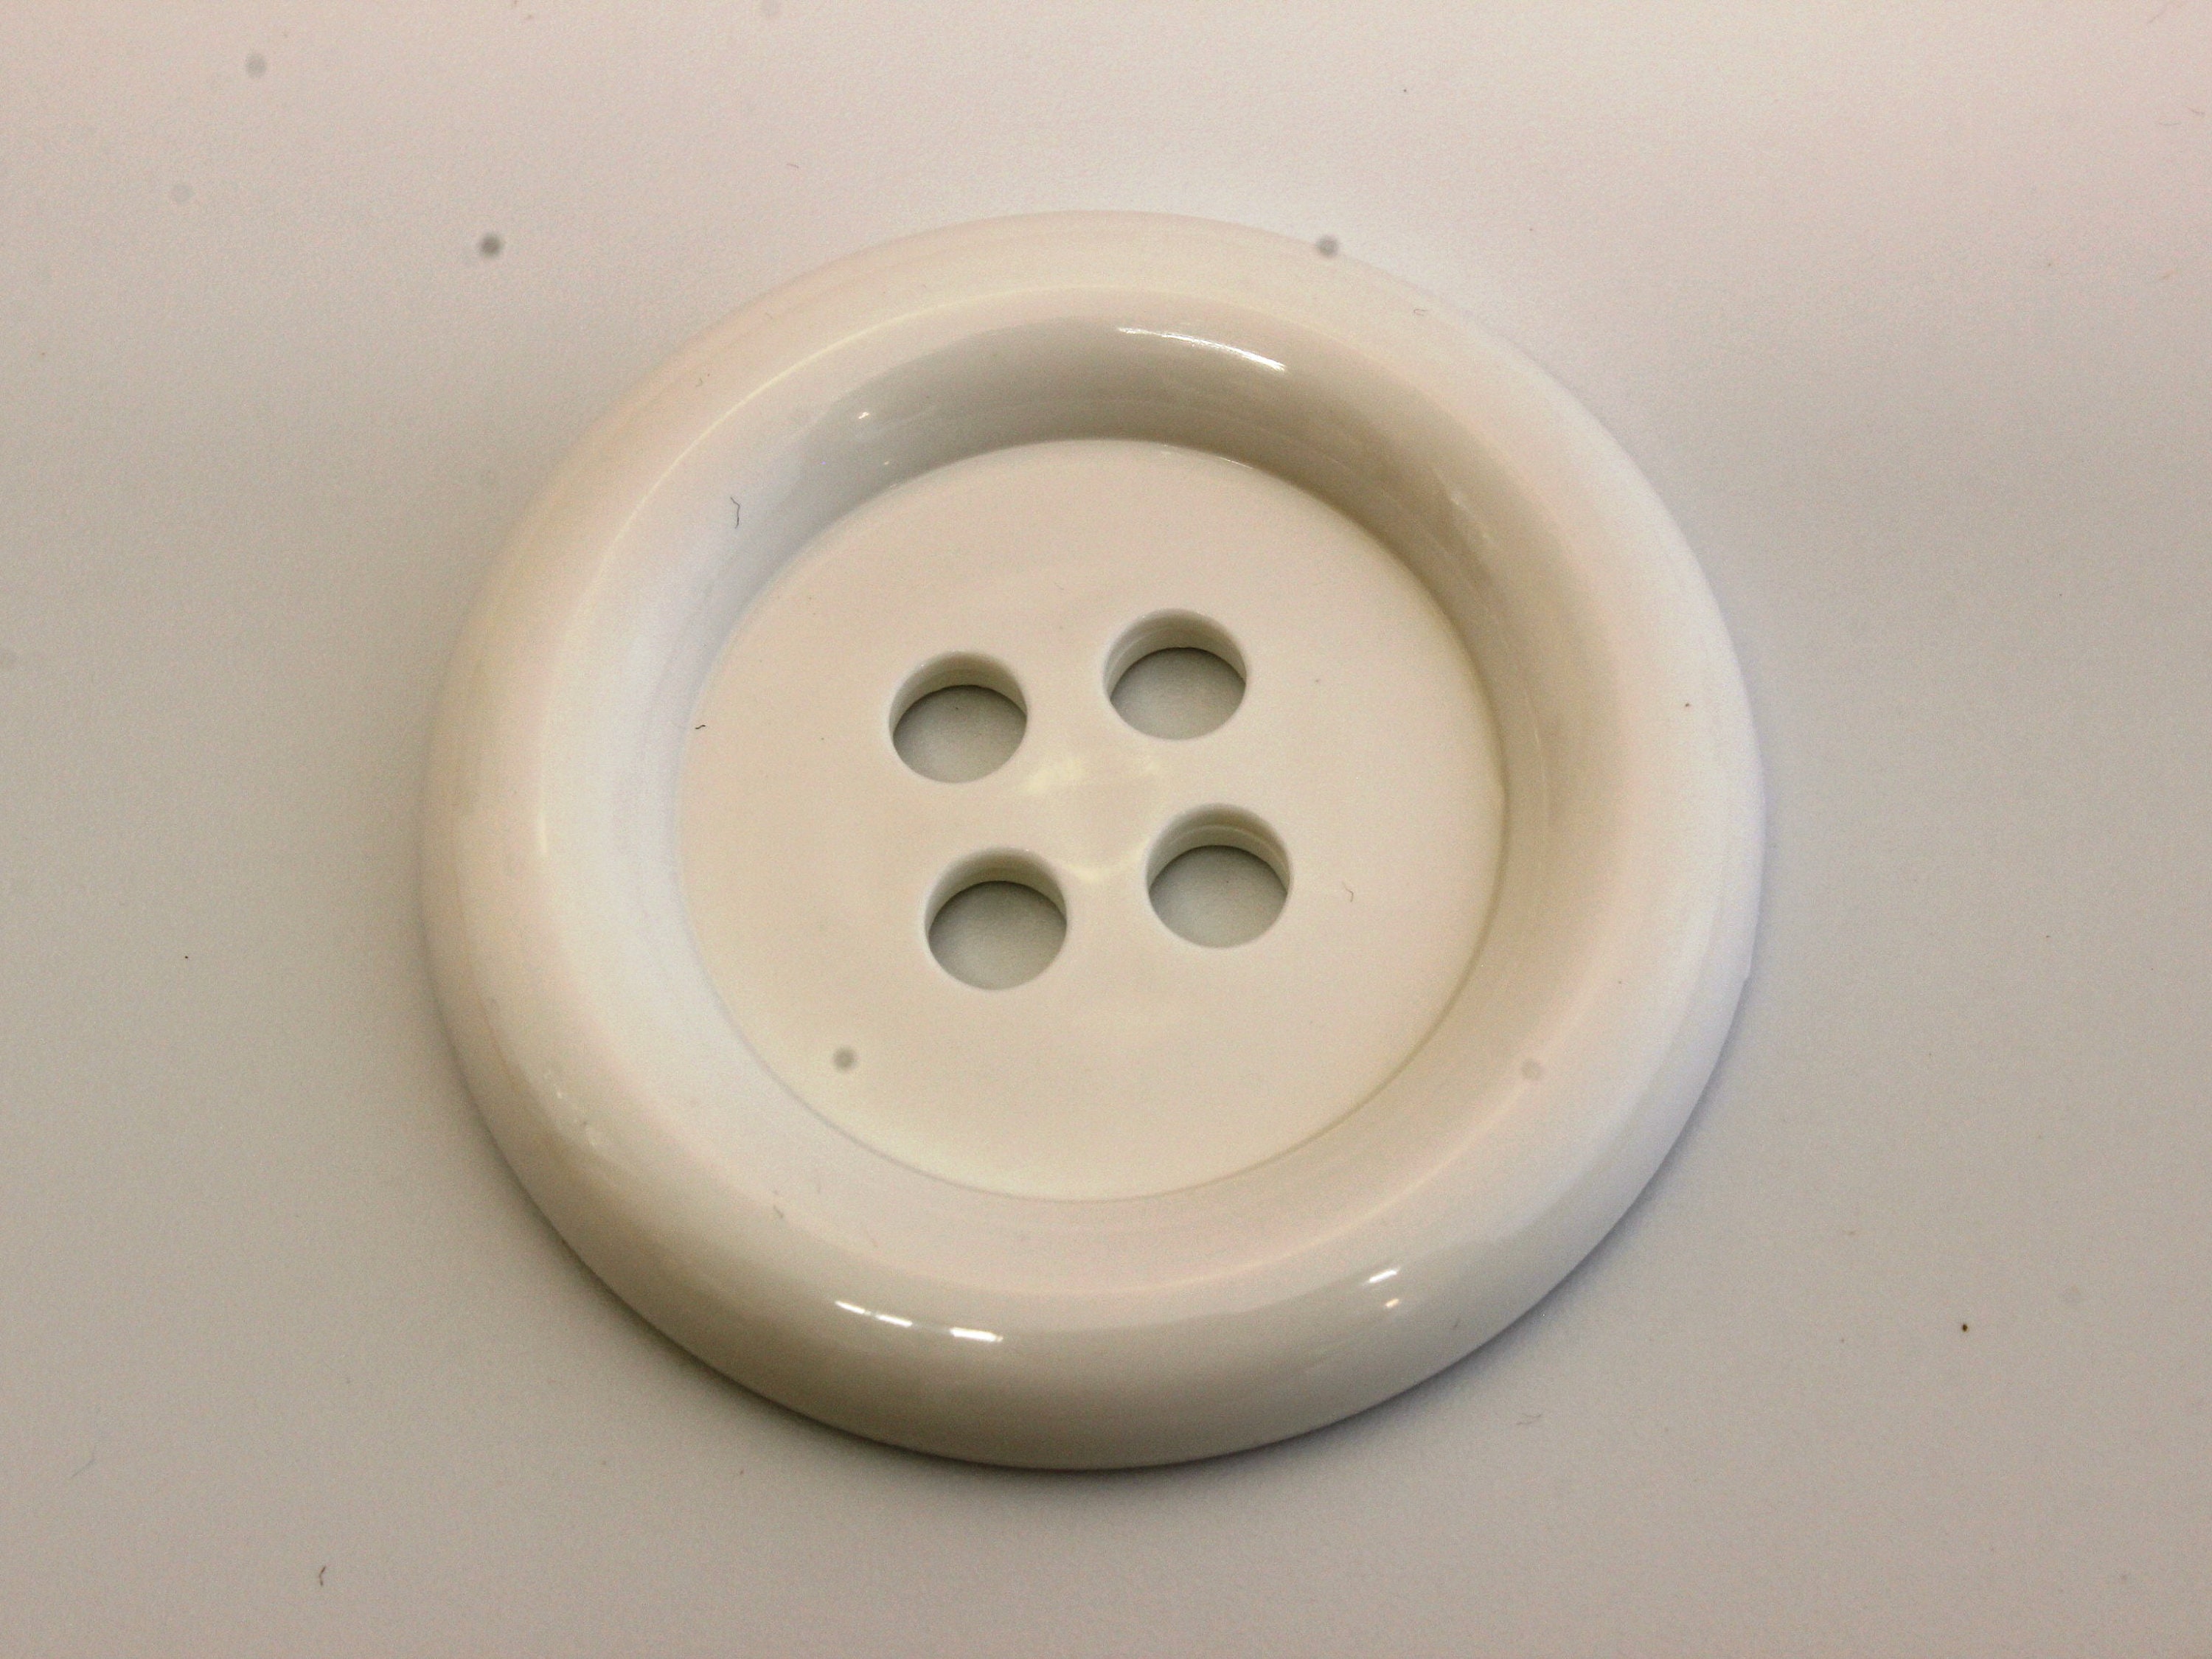 Giant WHITE Buttons, Super Xl Plastic Buttons 6.5cm, Extra Large Buttons,  Huge White Button, UK Giant Buttons, UK Buttons Shop, Coat Buttons 